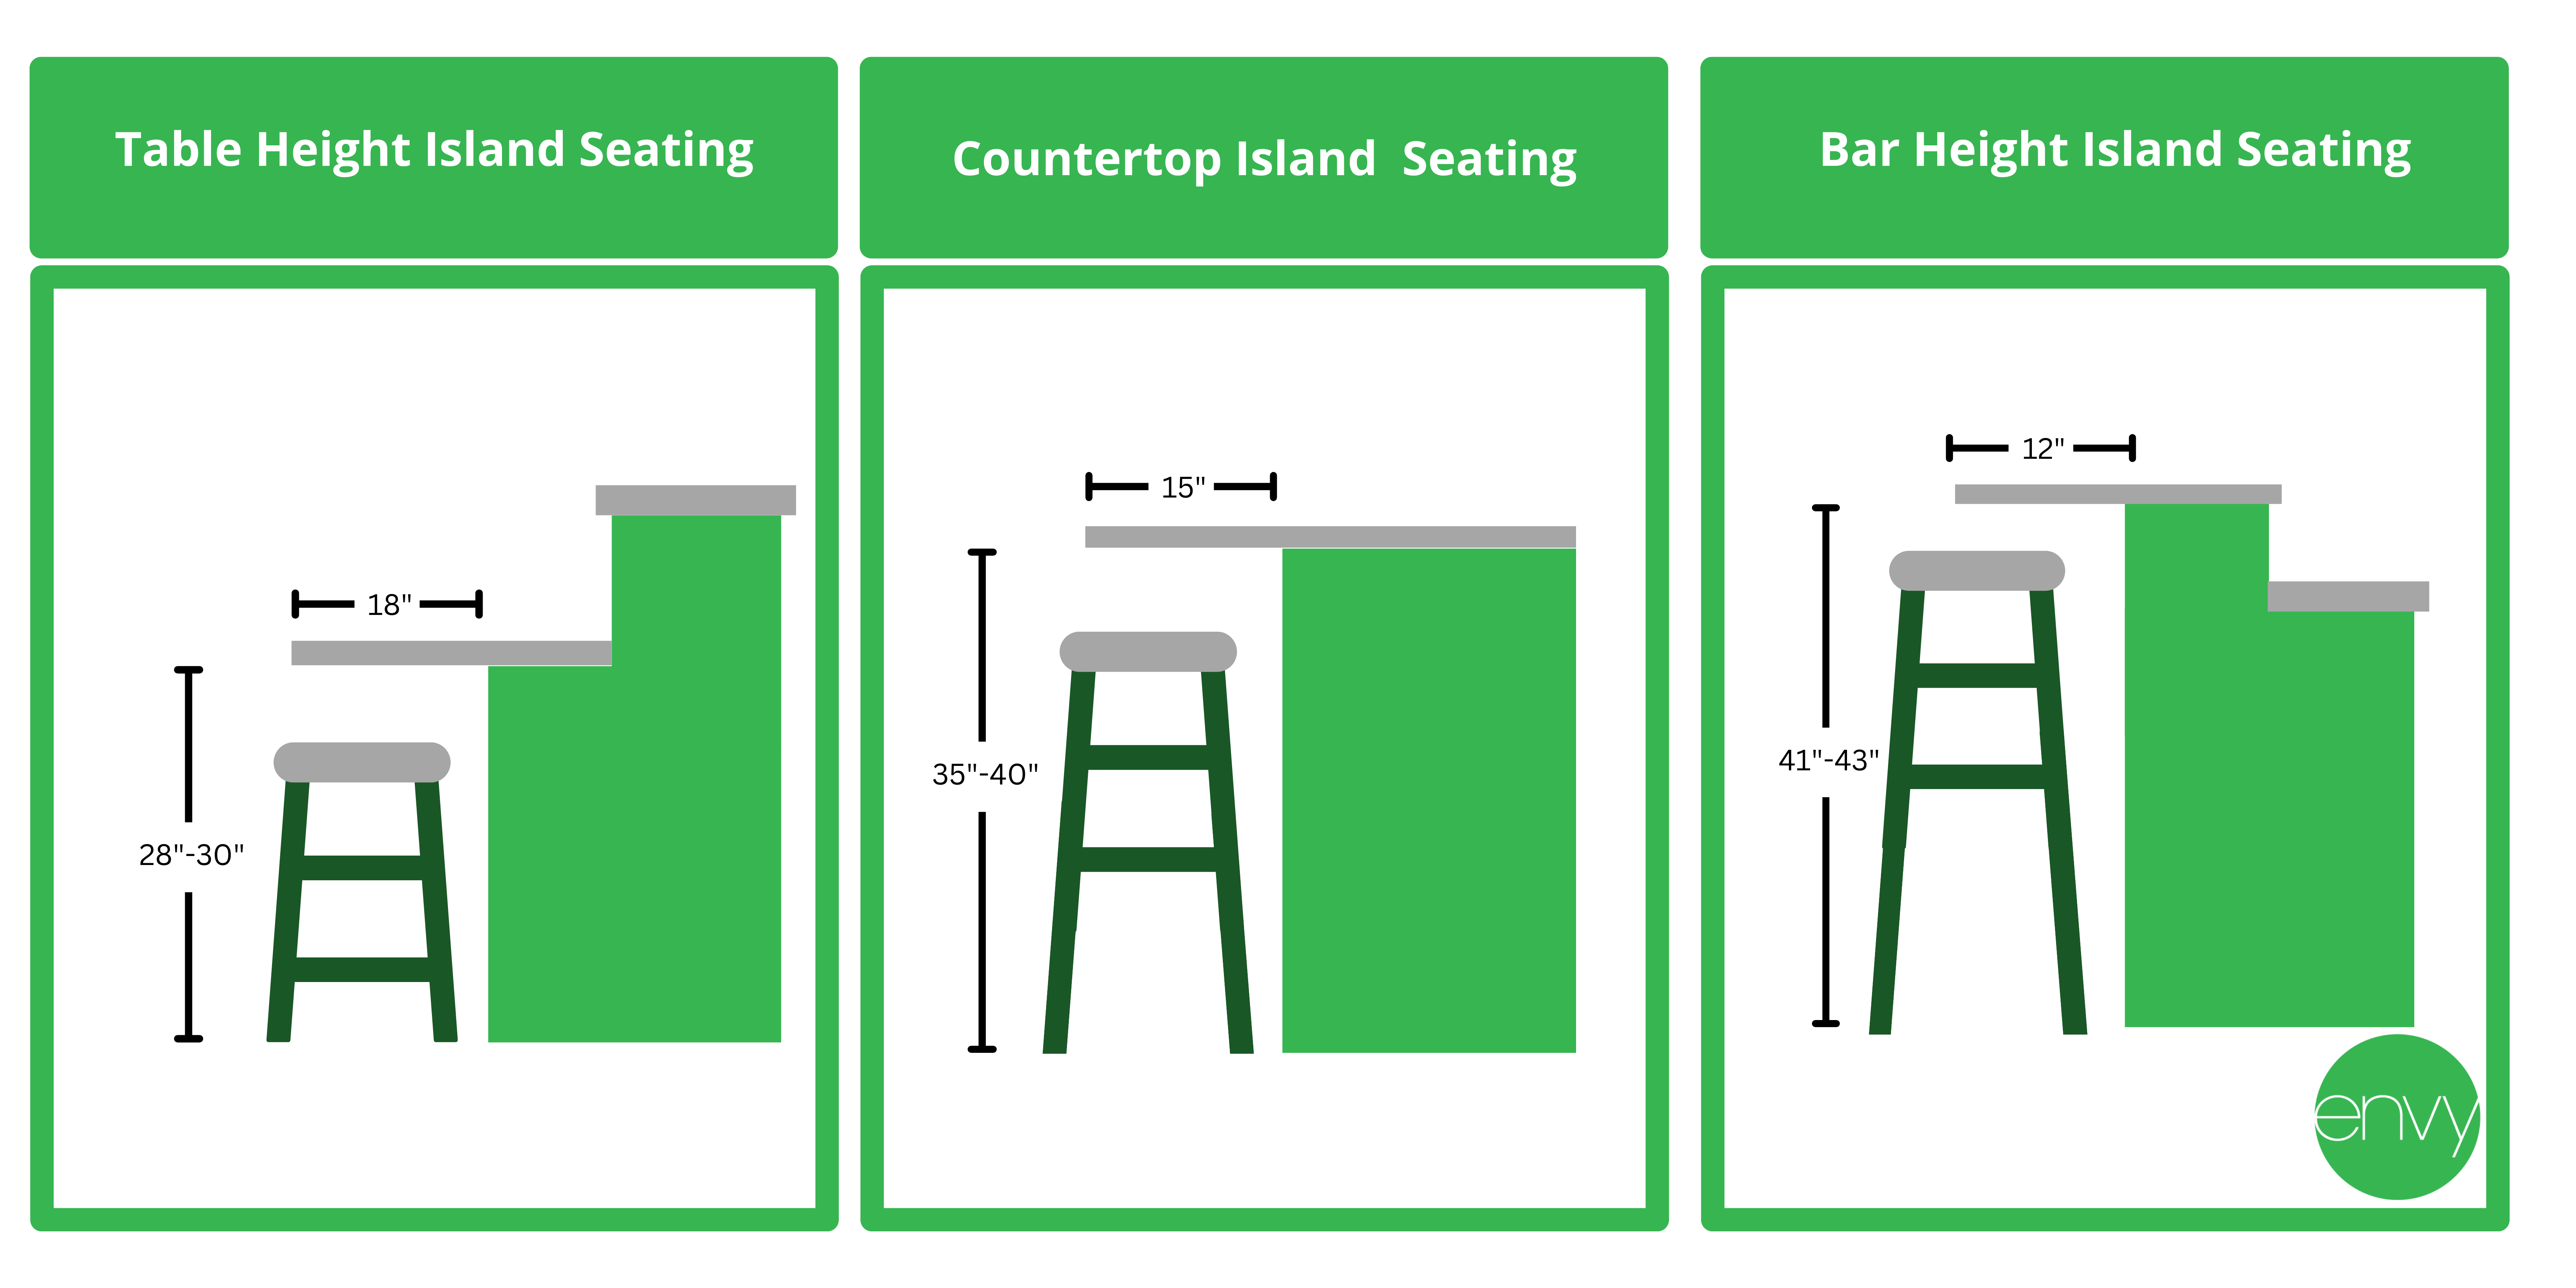 10.3.2022 InfographicTable Height Island Seating 